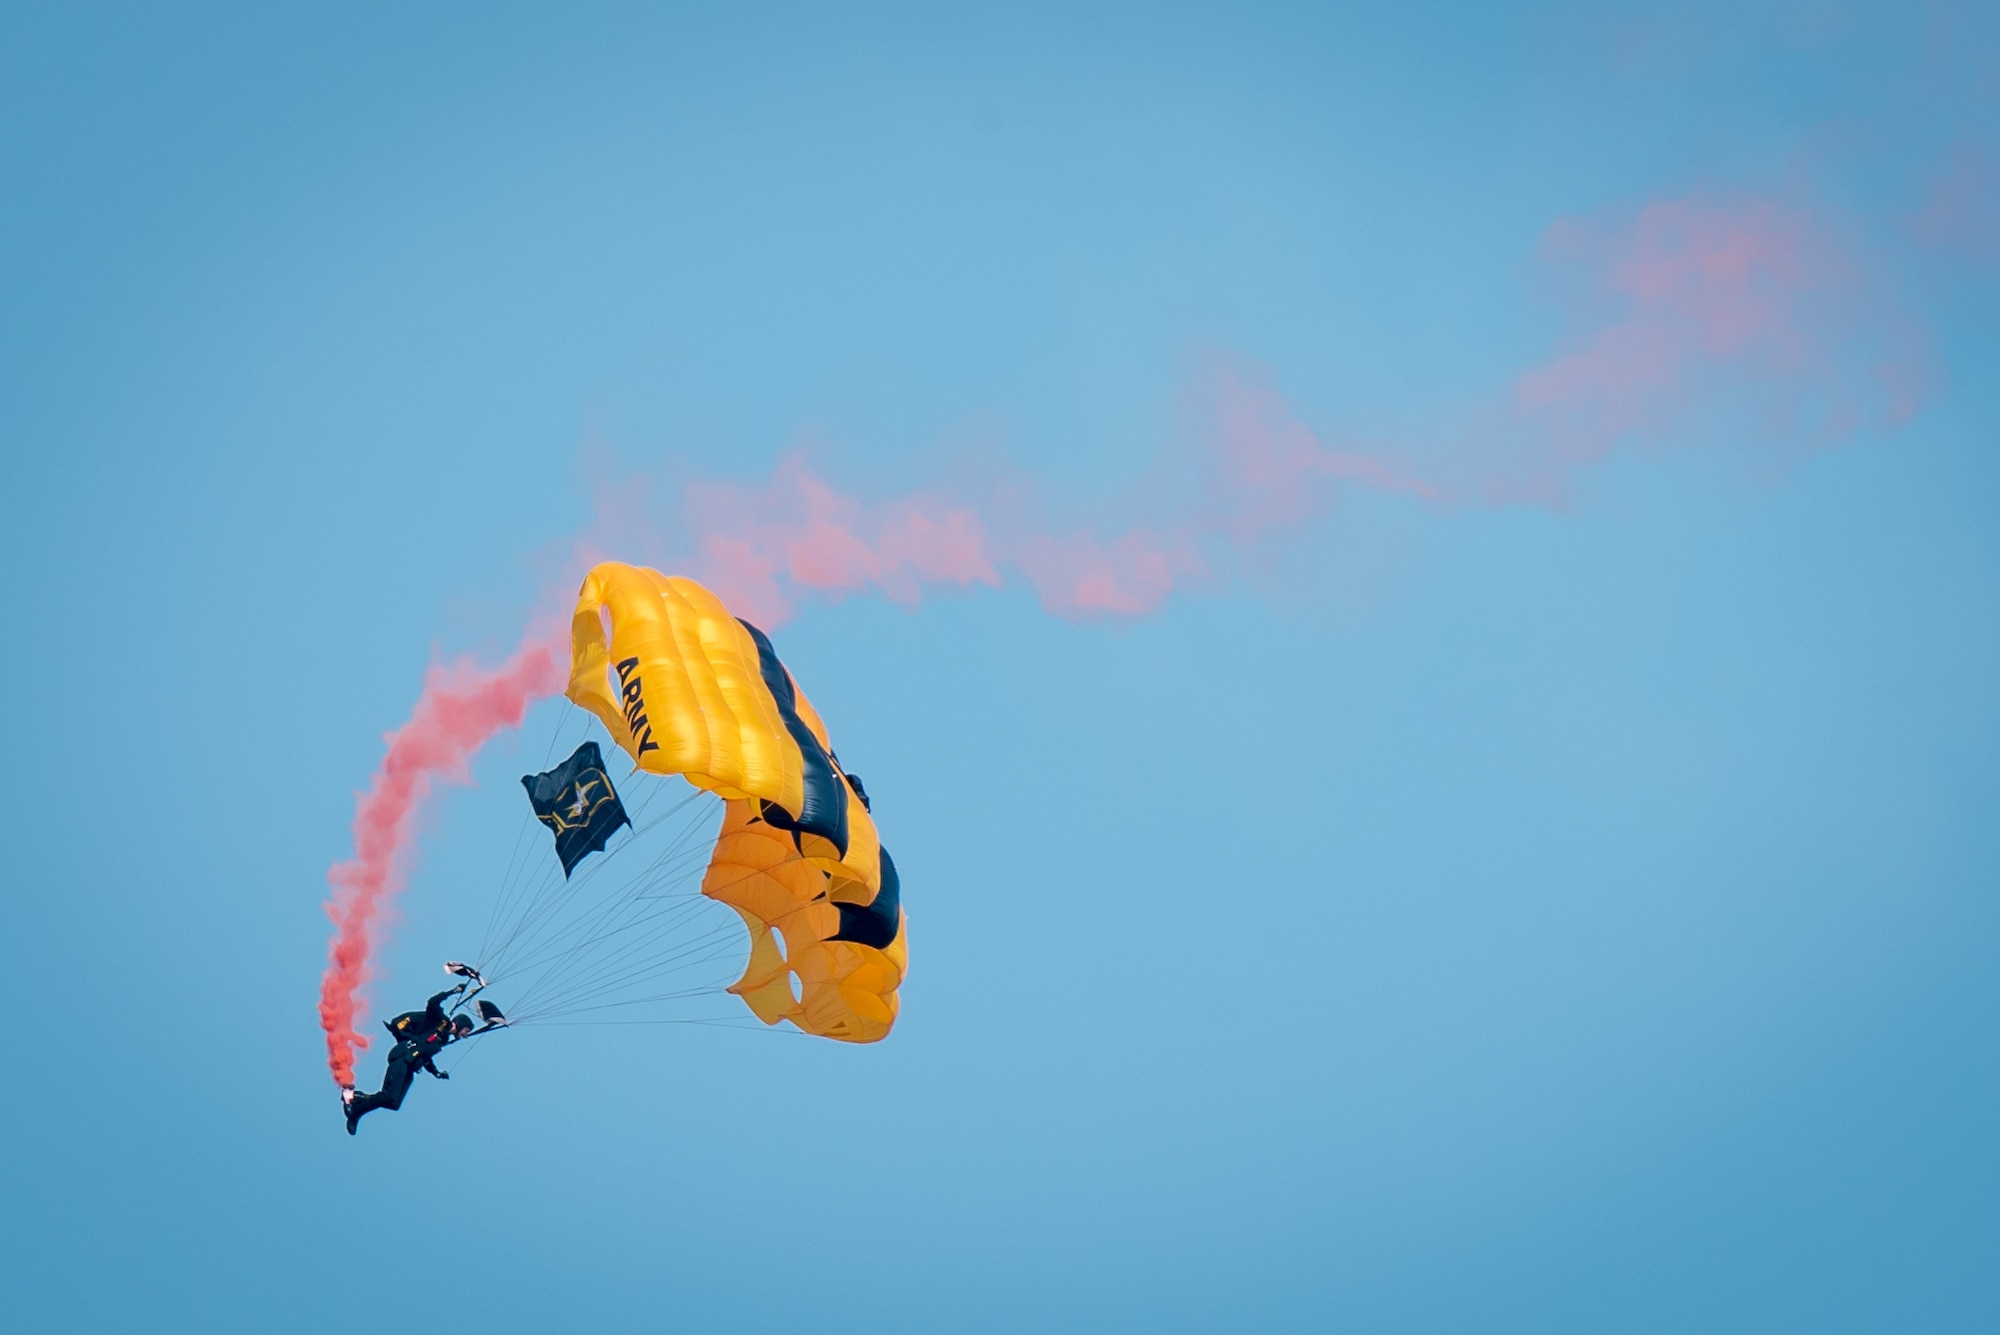 A soldier from the U.S. Army’s Golden Knights demonstration team parachutes into downtown during the Thunder Over Louisville air show in Louisville, Ky., April 22, 2017. The annual event has grown to become the largest single-day air show in the nation. (U.S. Air National Guard photo by Lt. Col. Dale Greer)